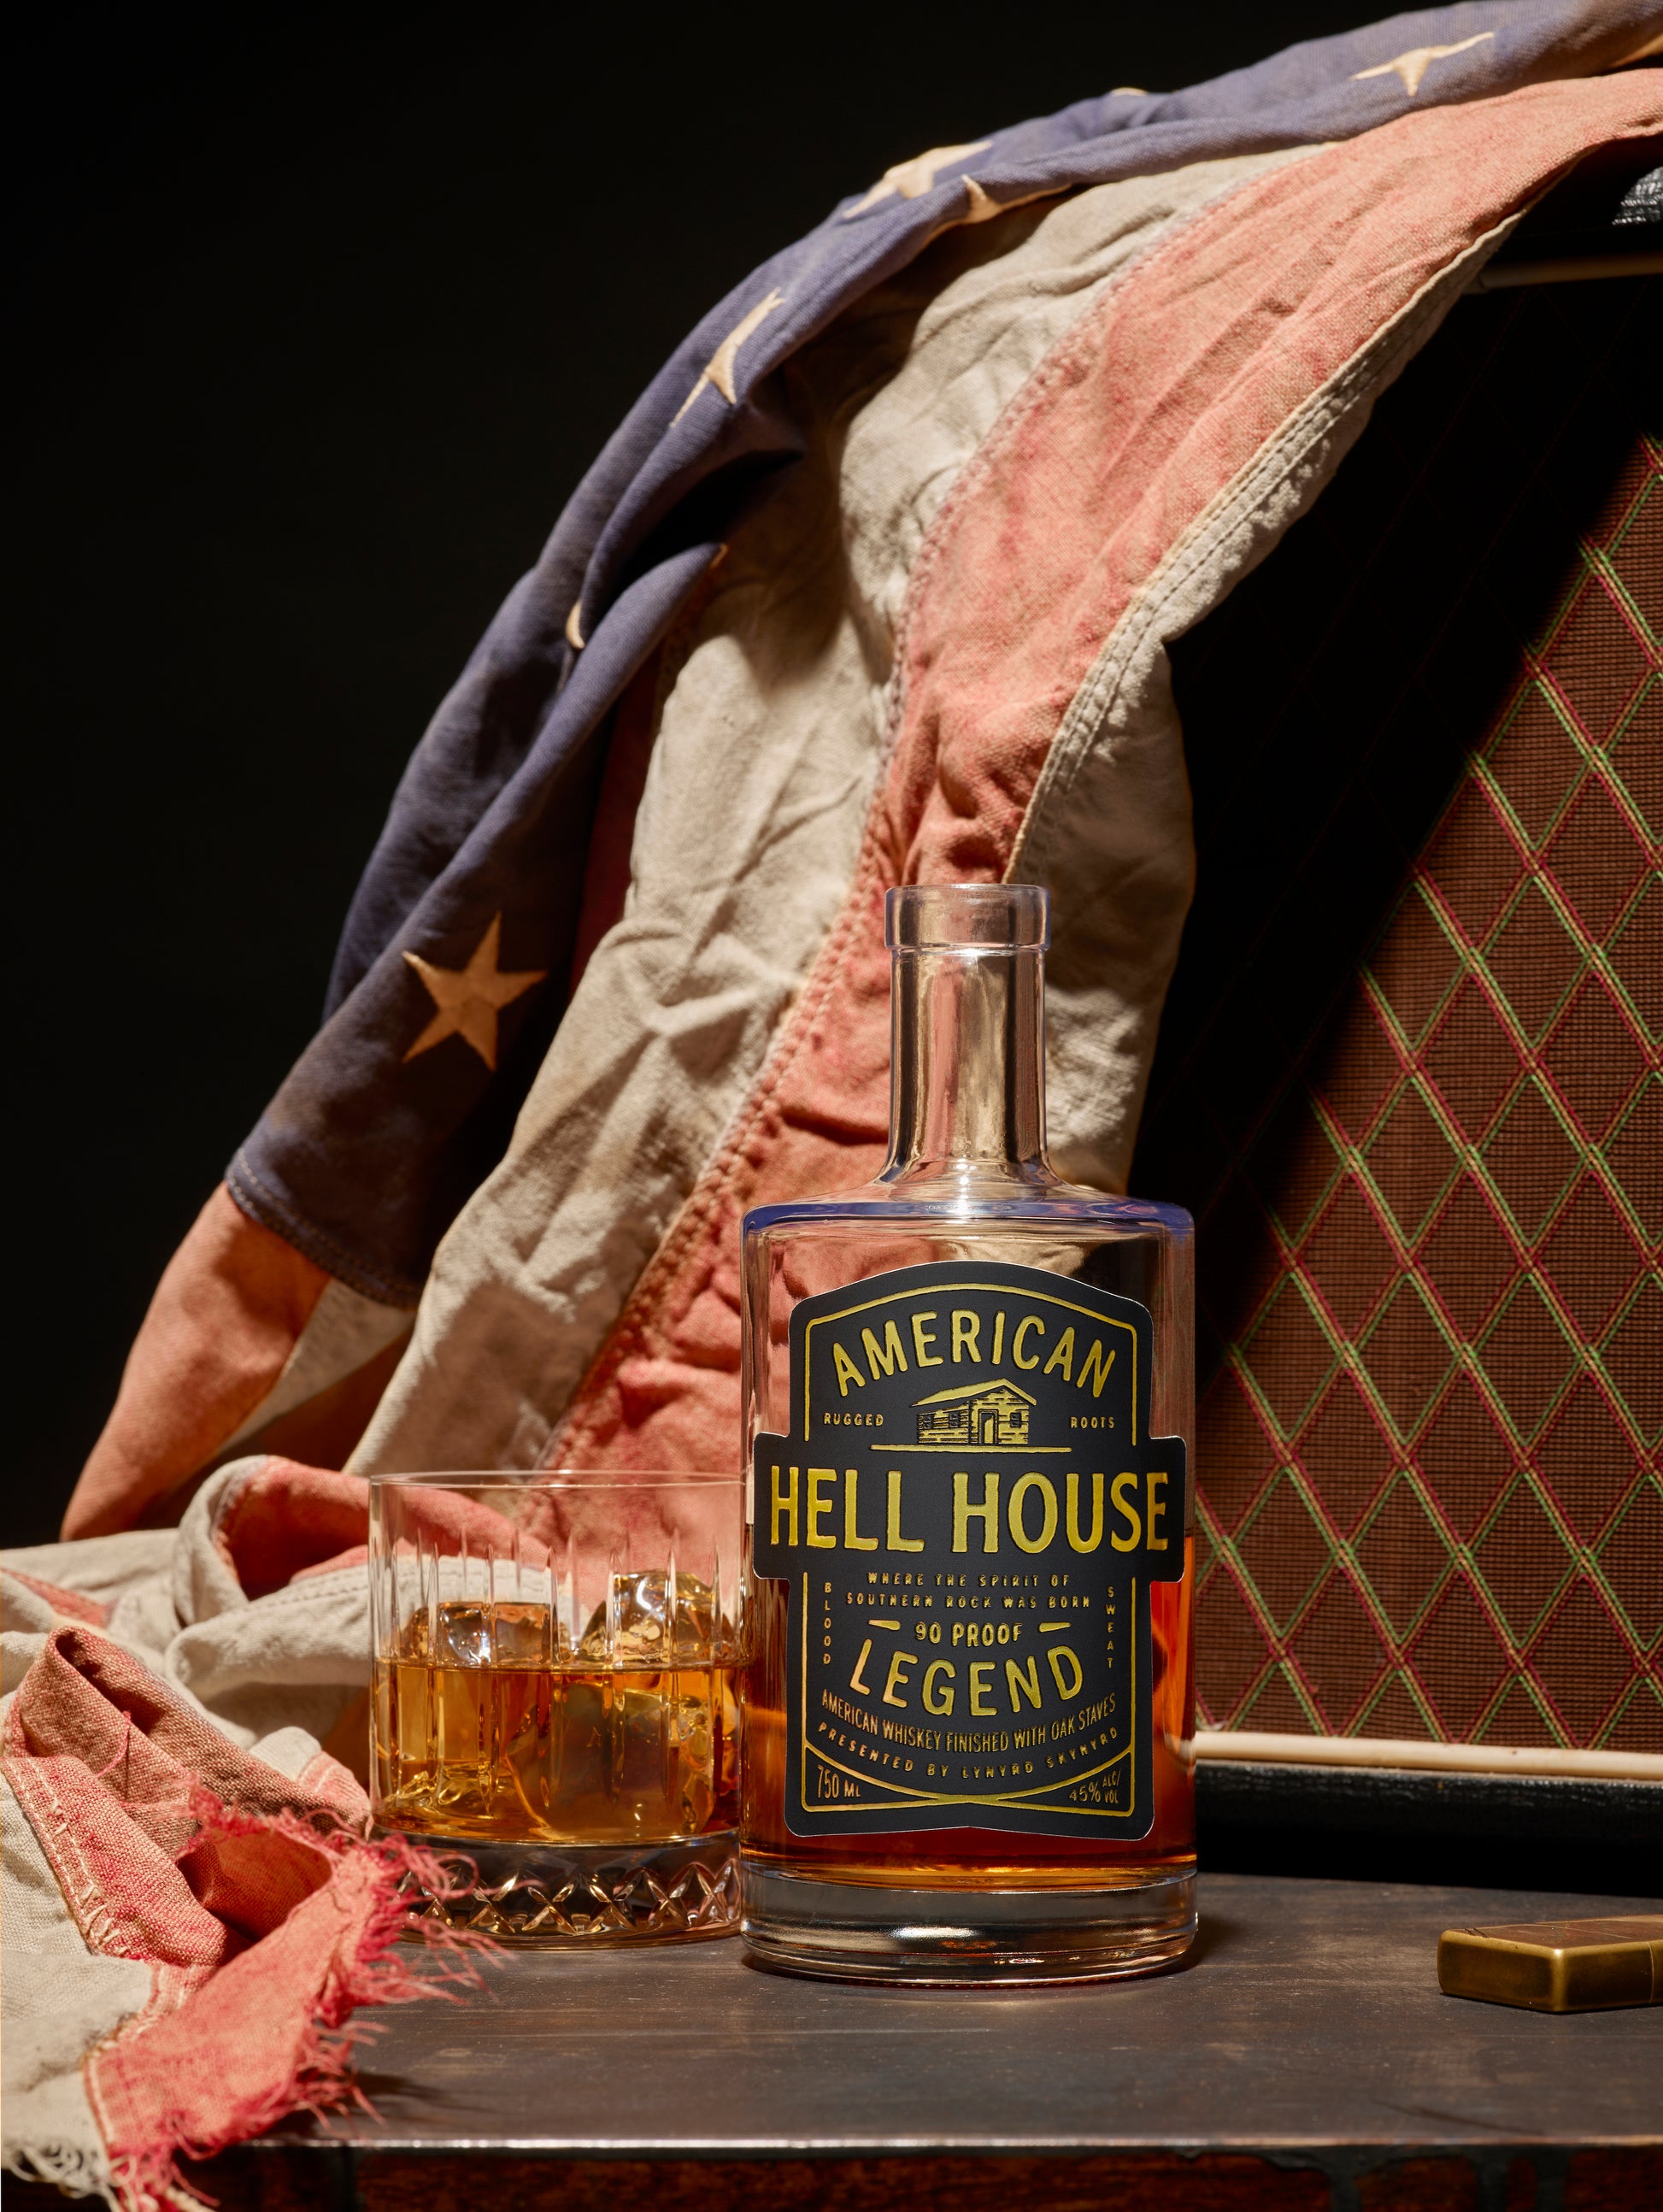 Hell House American Whiskey Lifestyle image